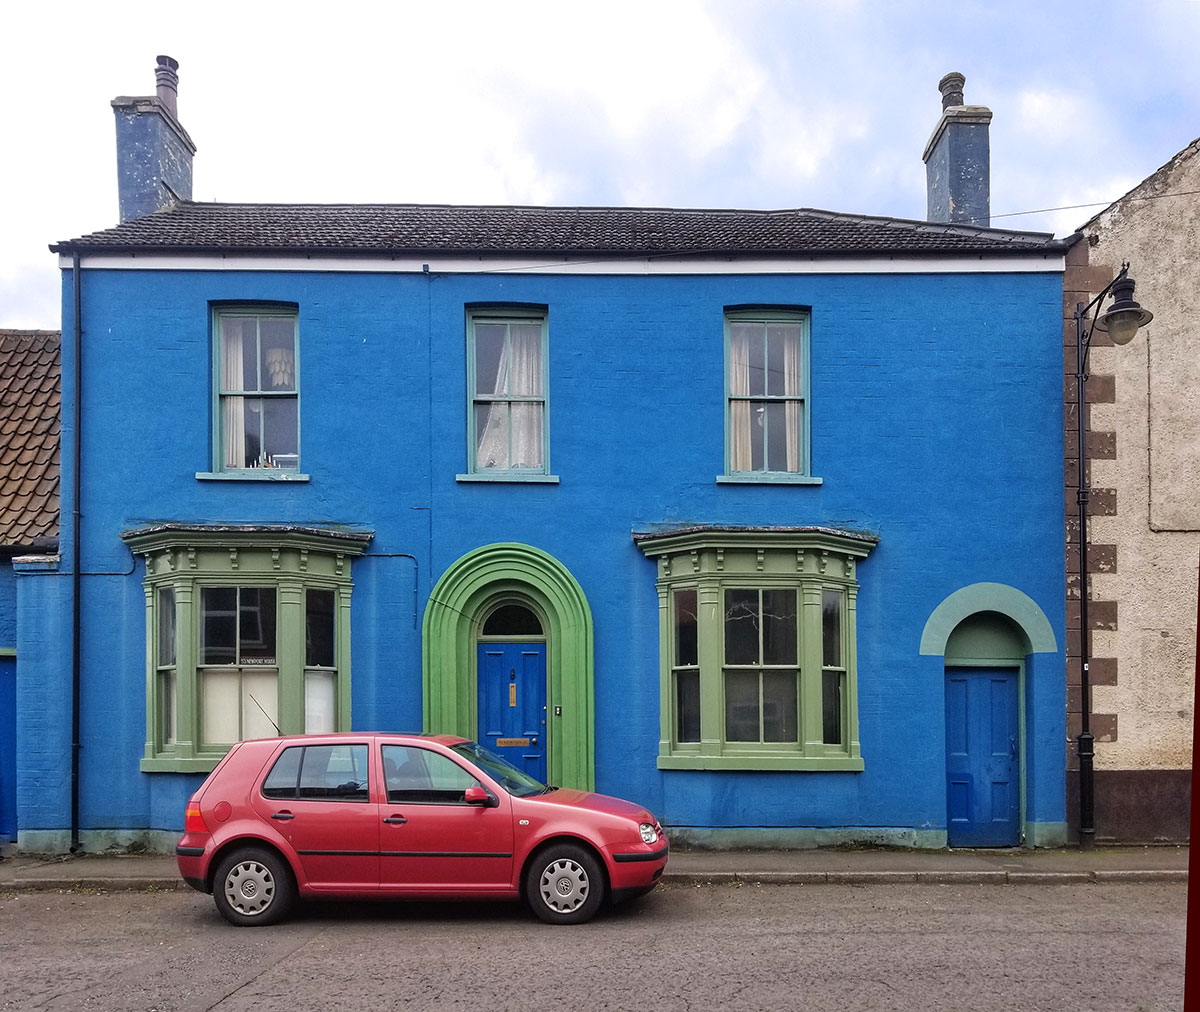 A red park is parked on the road outside a bright blue house with green painted window frames.